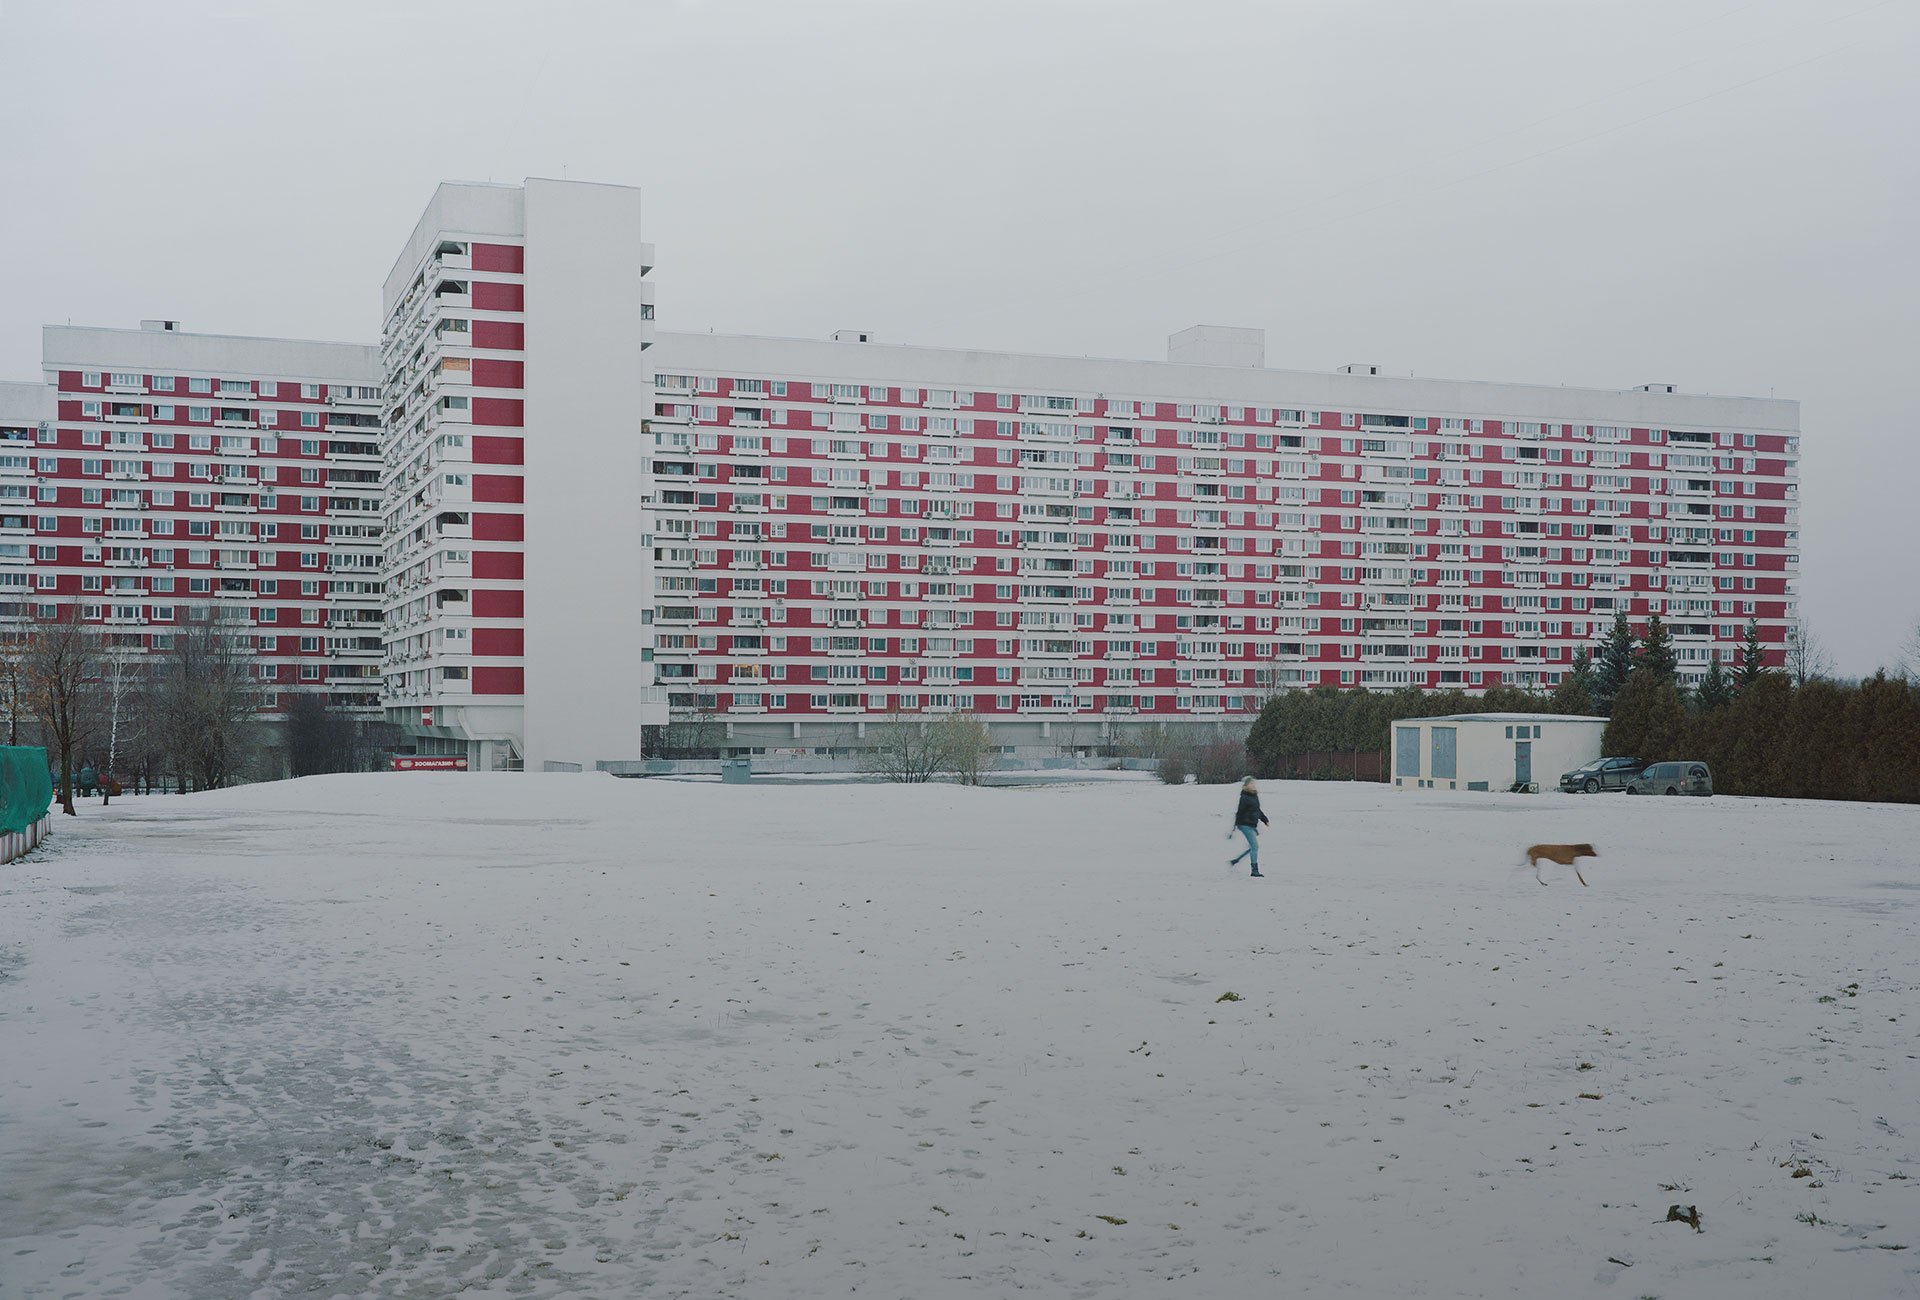 Concretopia: searching for the secret meaning of the suburbs in eastern Europe